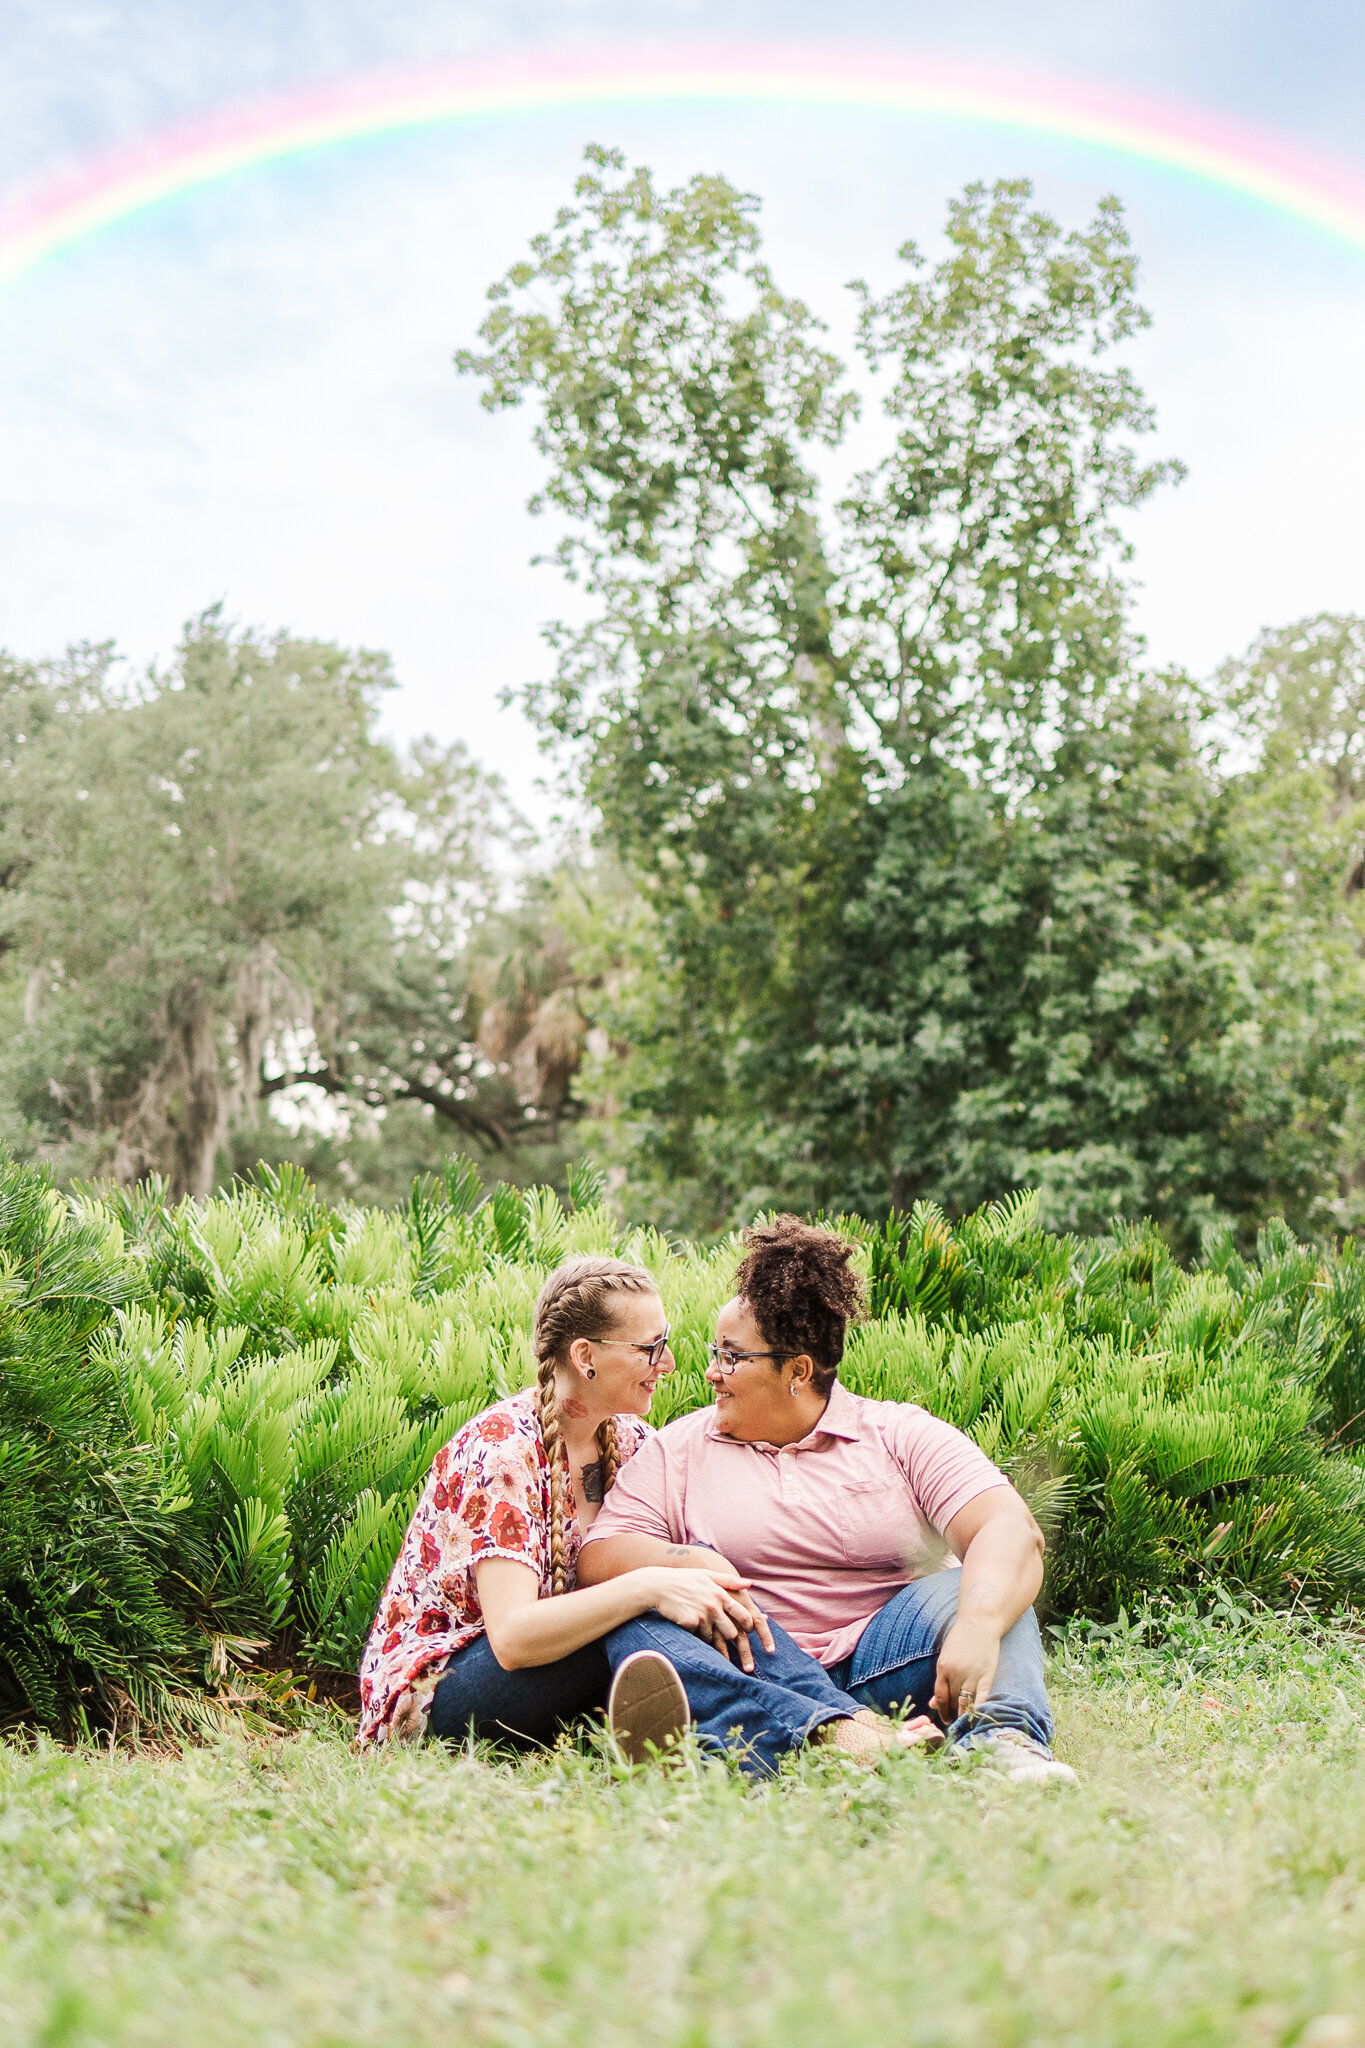 An interracial lesbian couple sitting on the grass with a rainbow